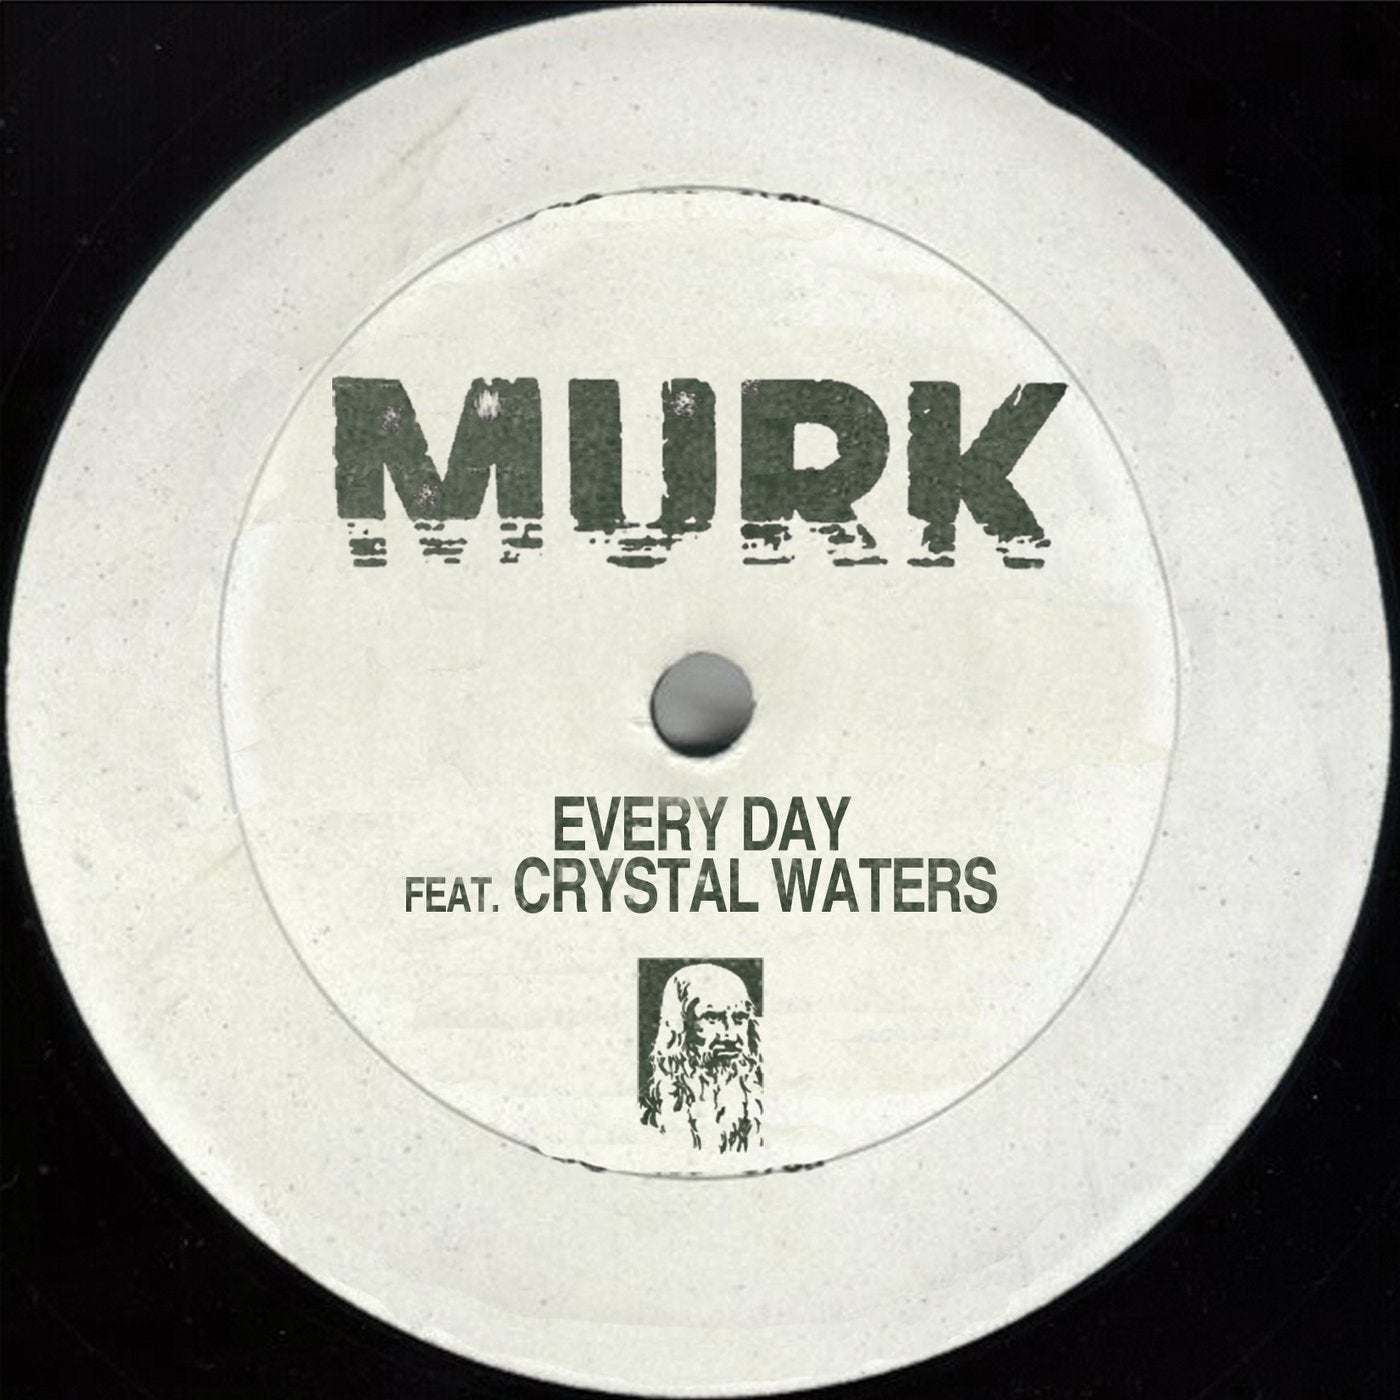 Every Day Feat. Crystal Waters